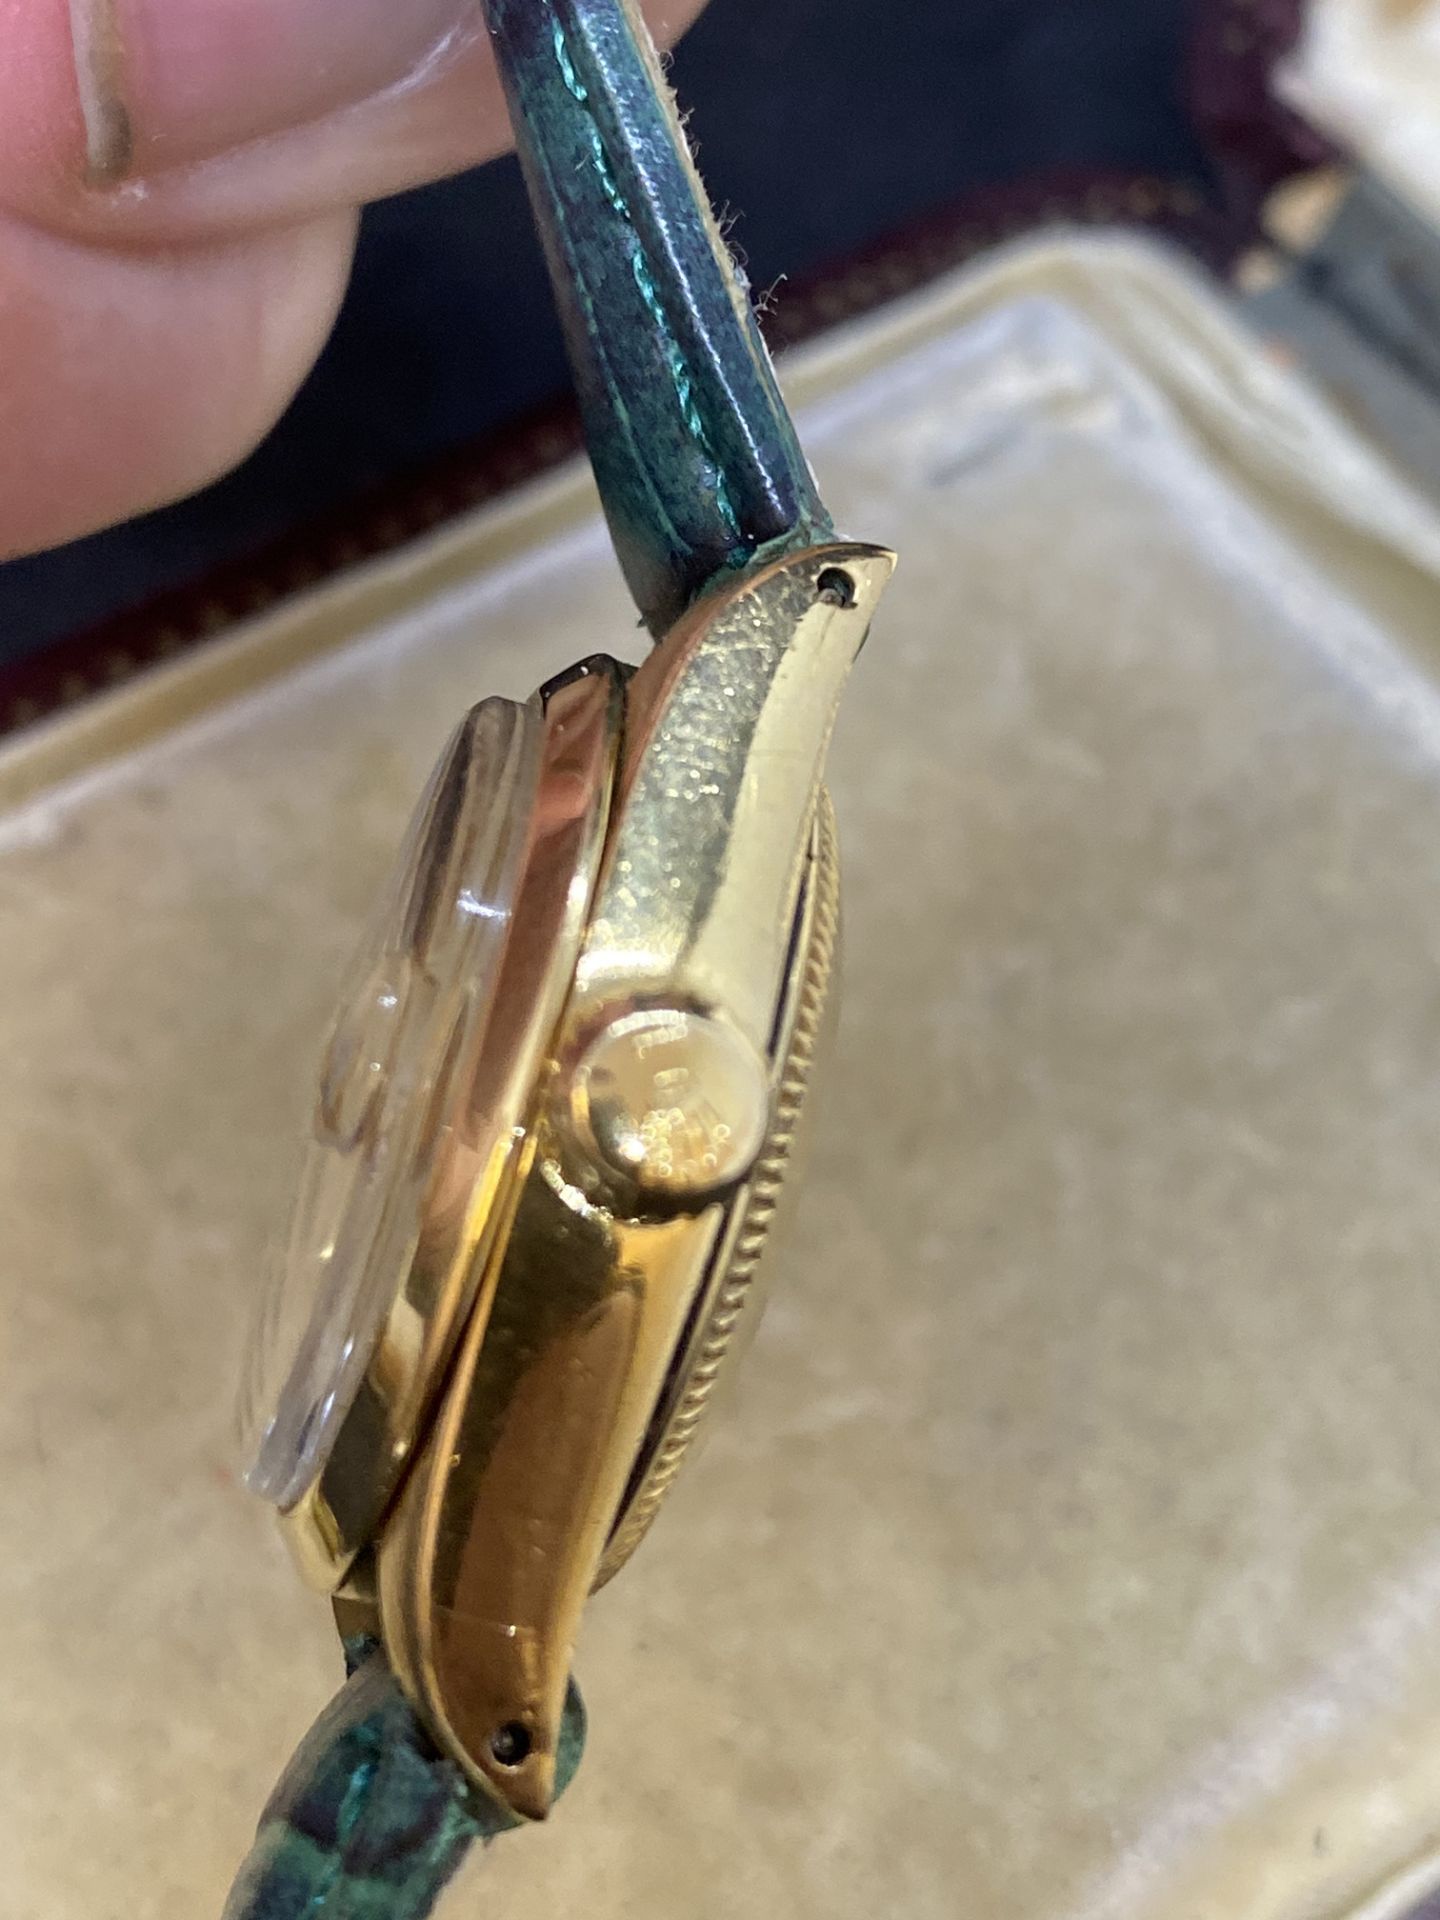 18ct GOLD ROLEX WATCH ON LEATHER STRAP - Image 7 of 8